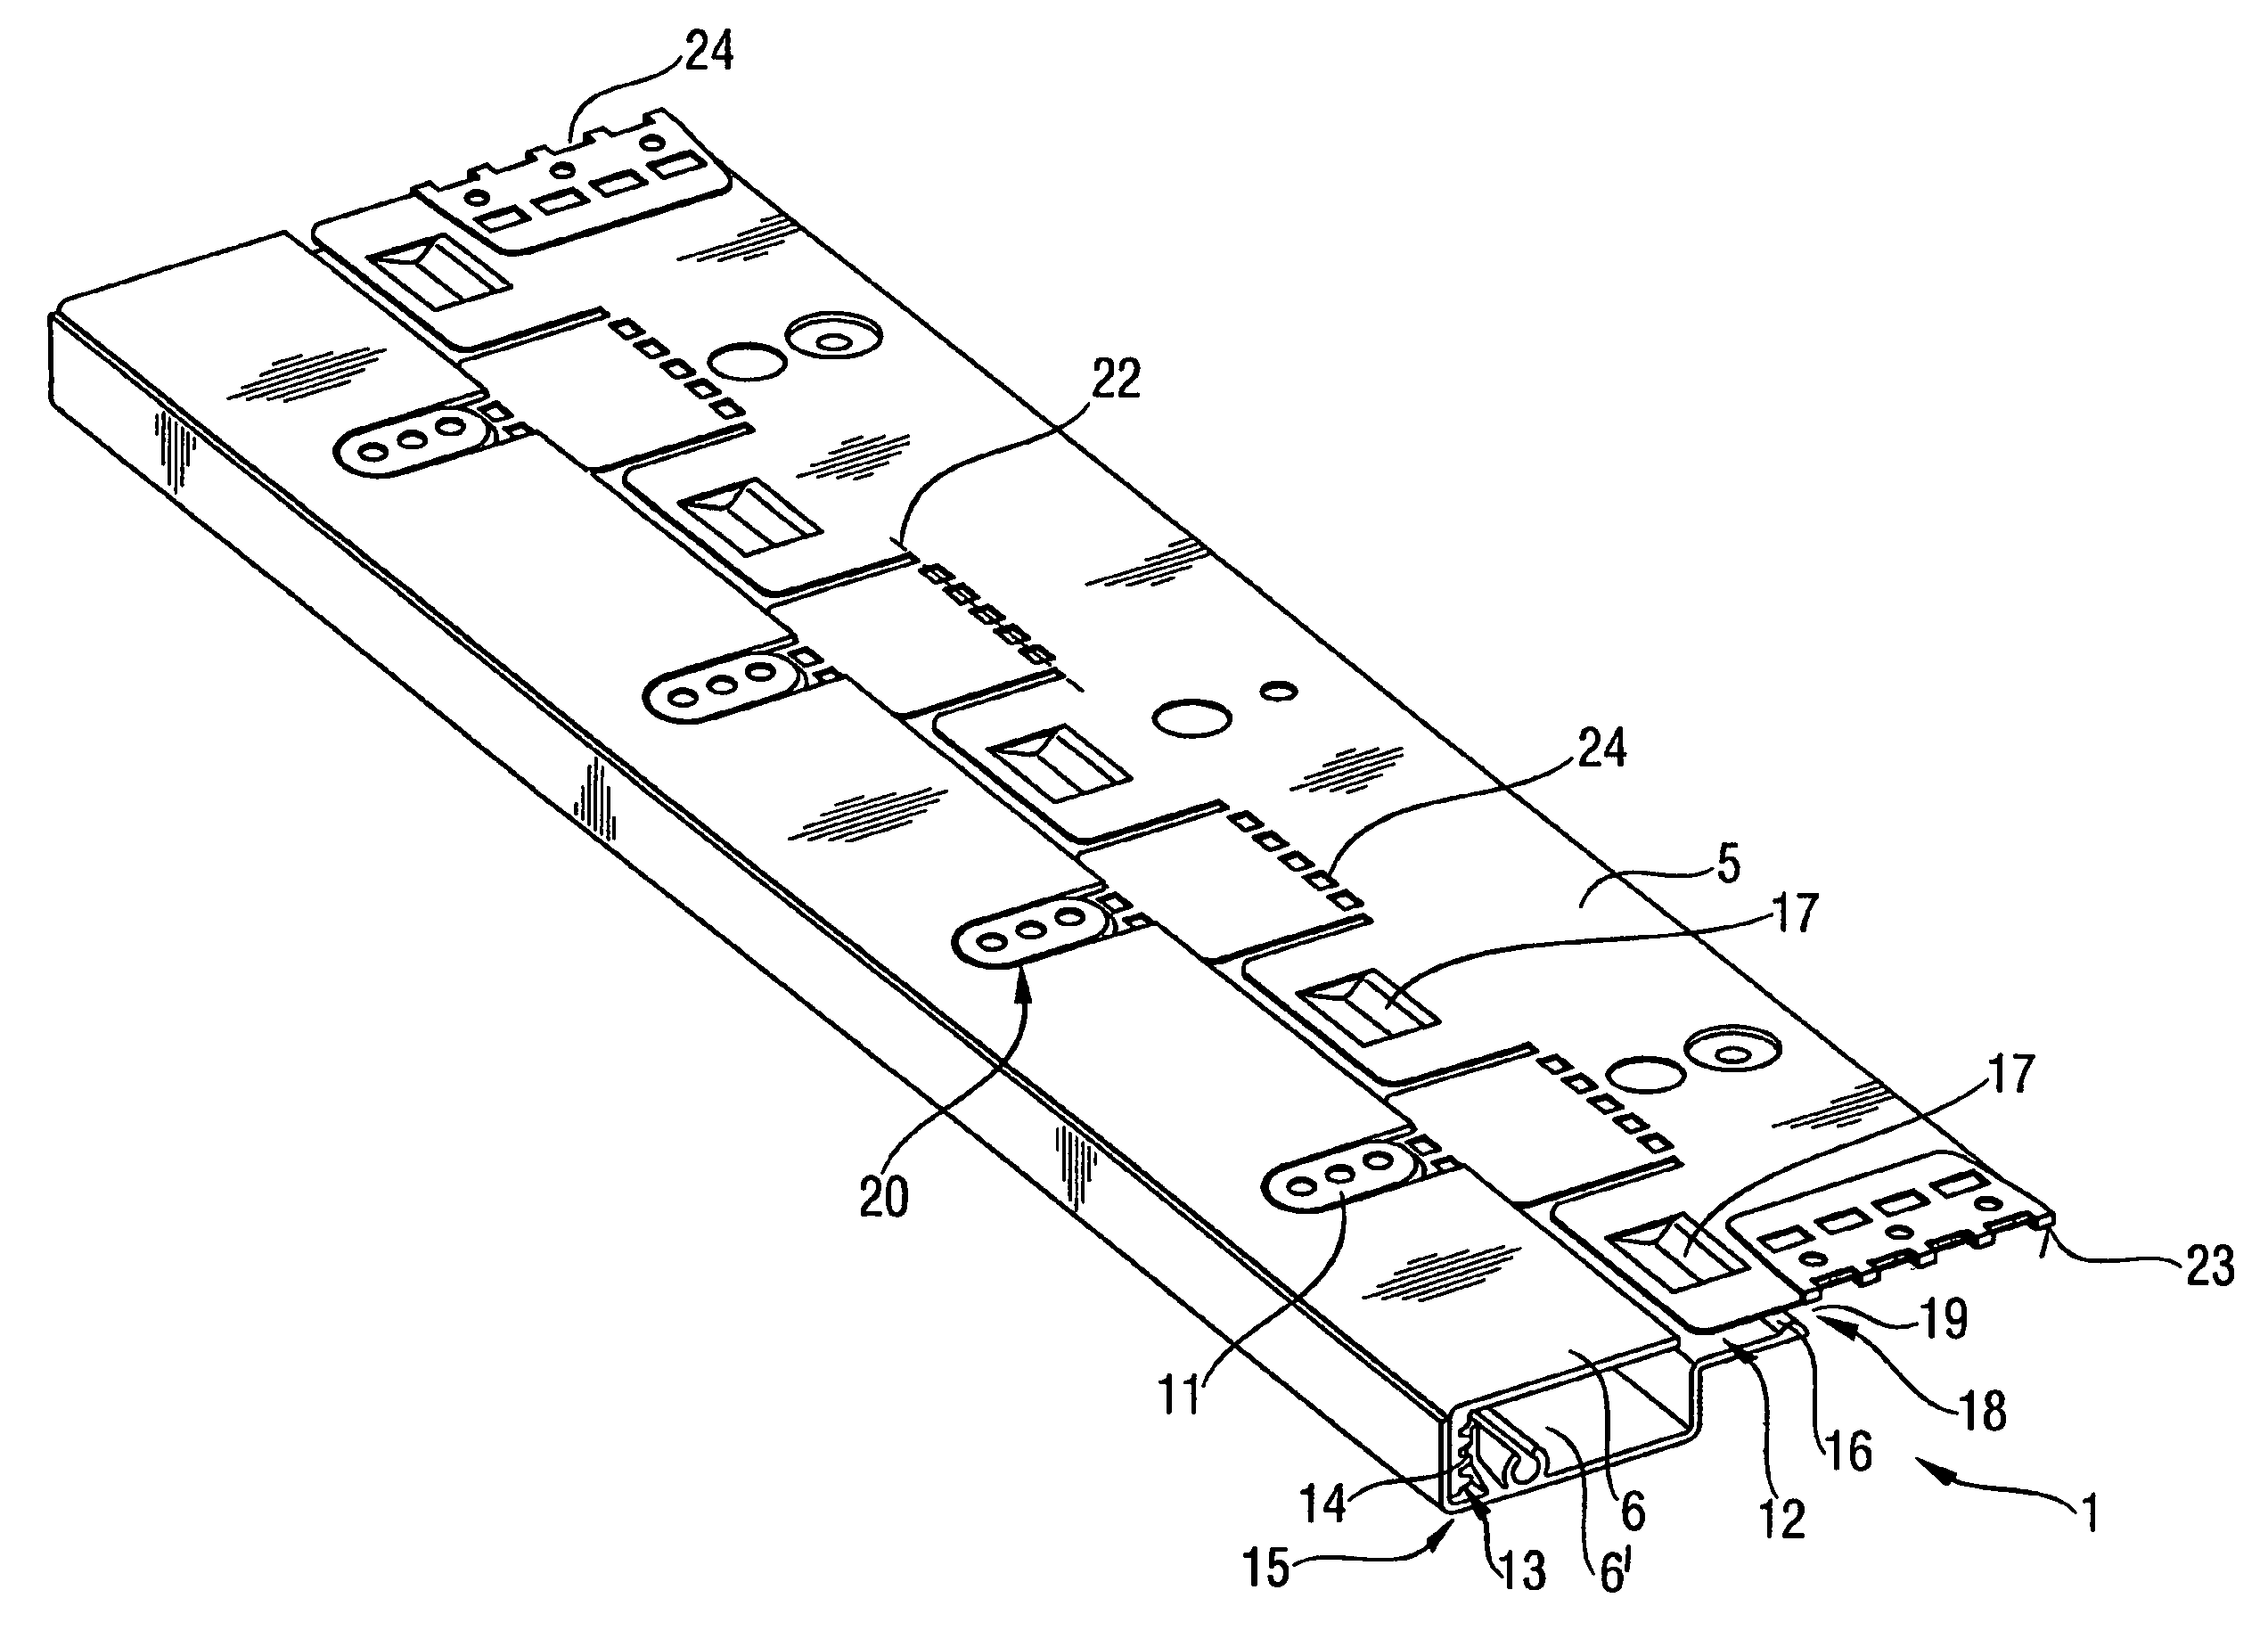 Connection system for connecting a built-in appliance to a furniture unit and furniture unit arrangement